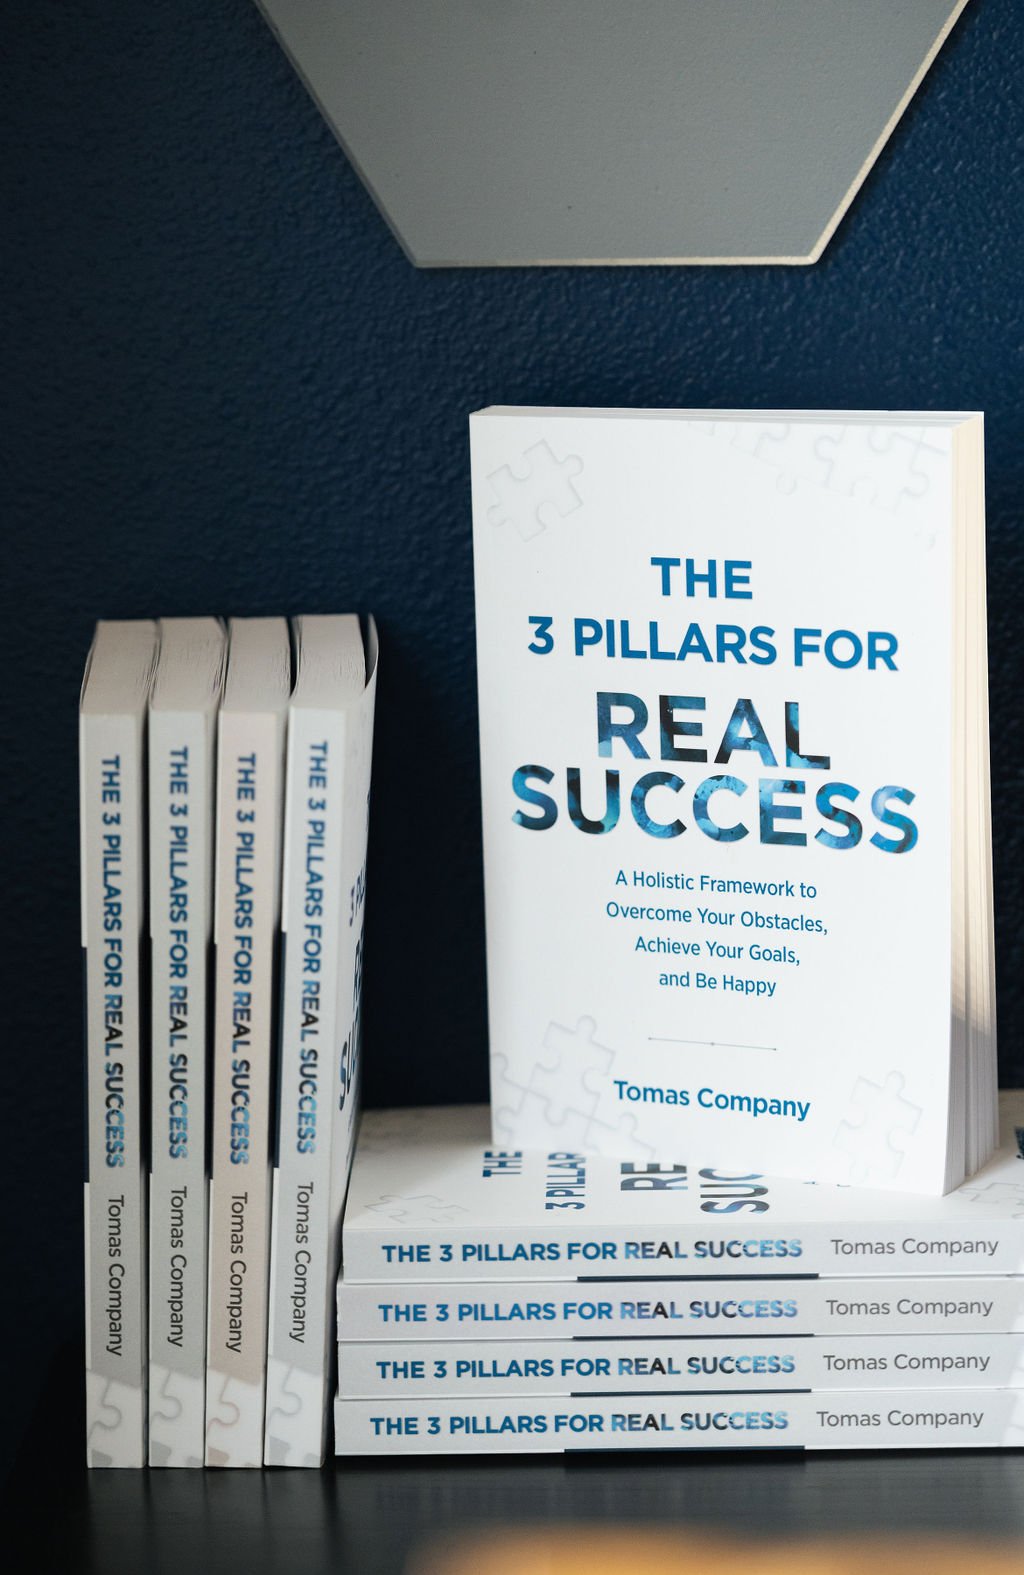 The 3 pillars of real success encompass business and branding